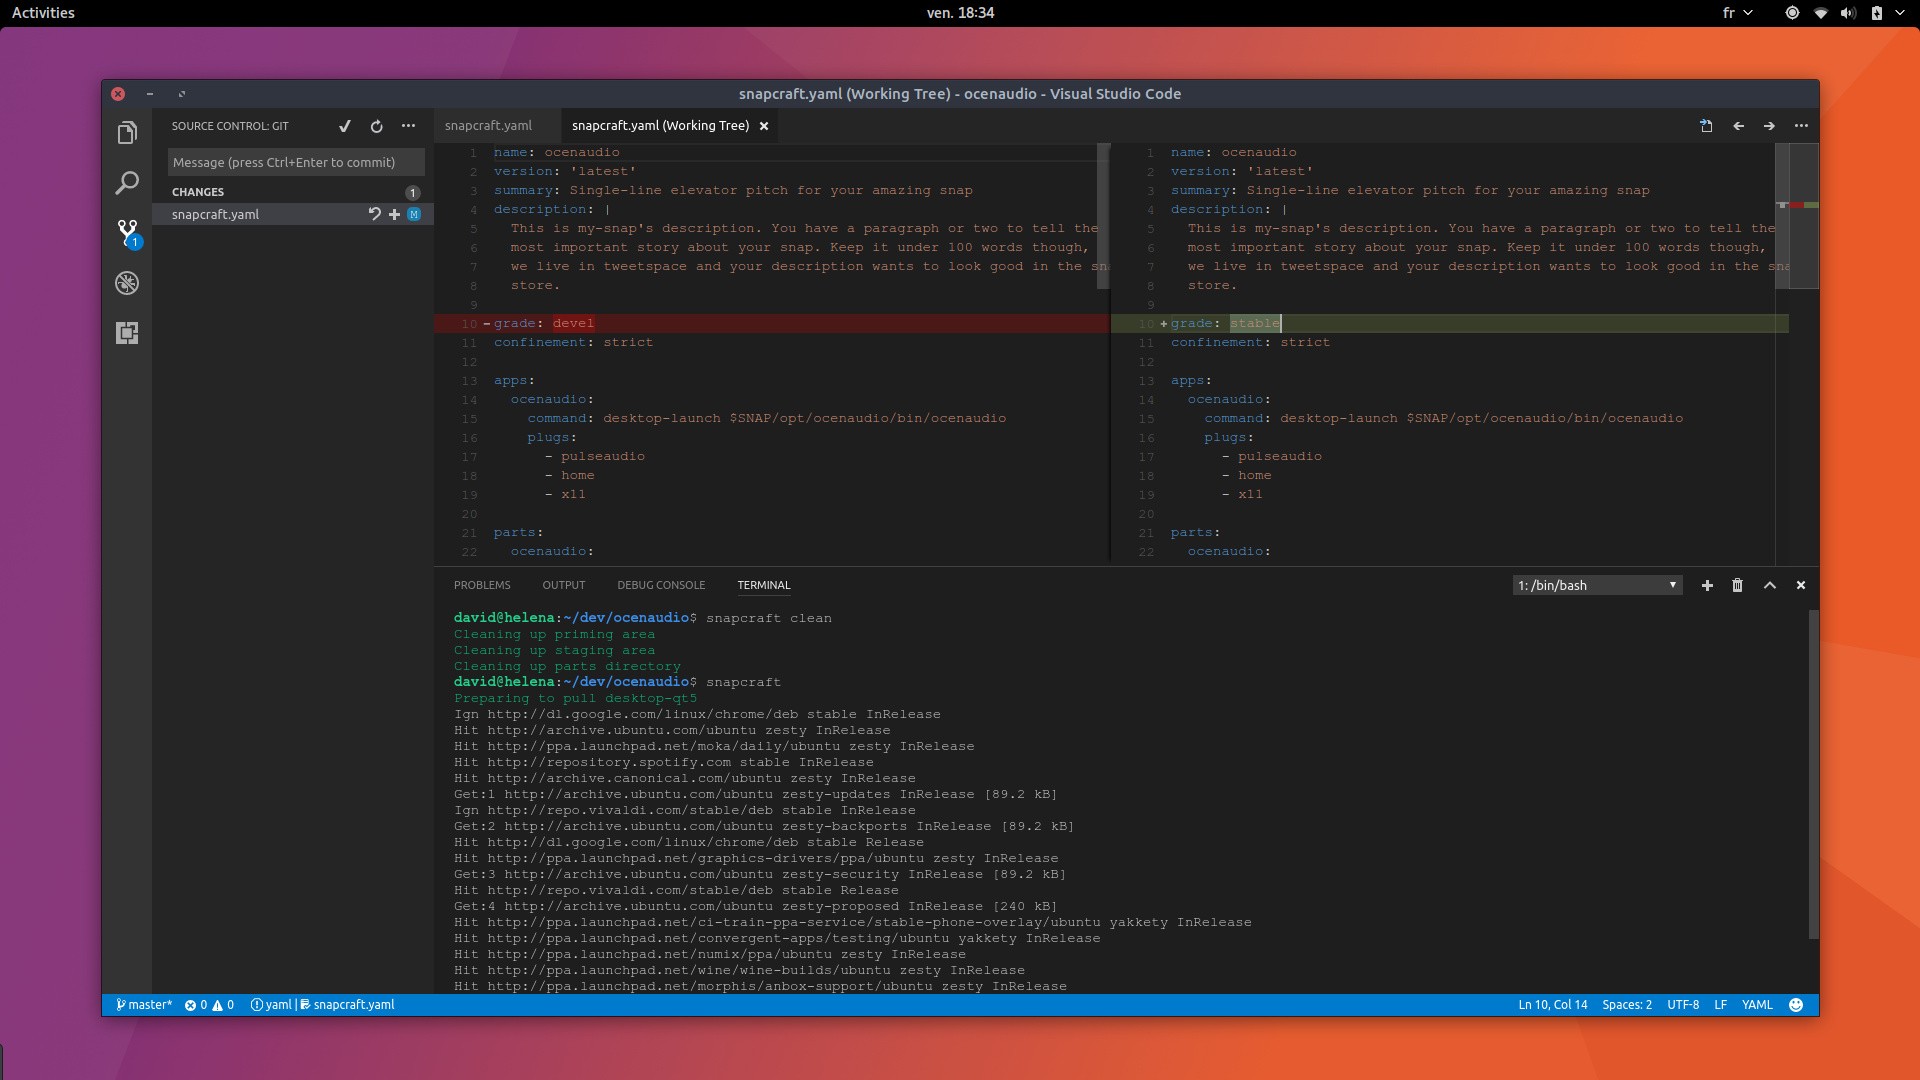 visual studio code for linux